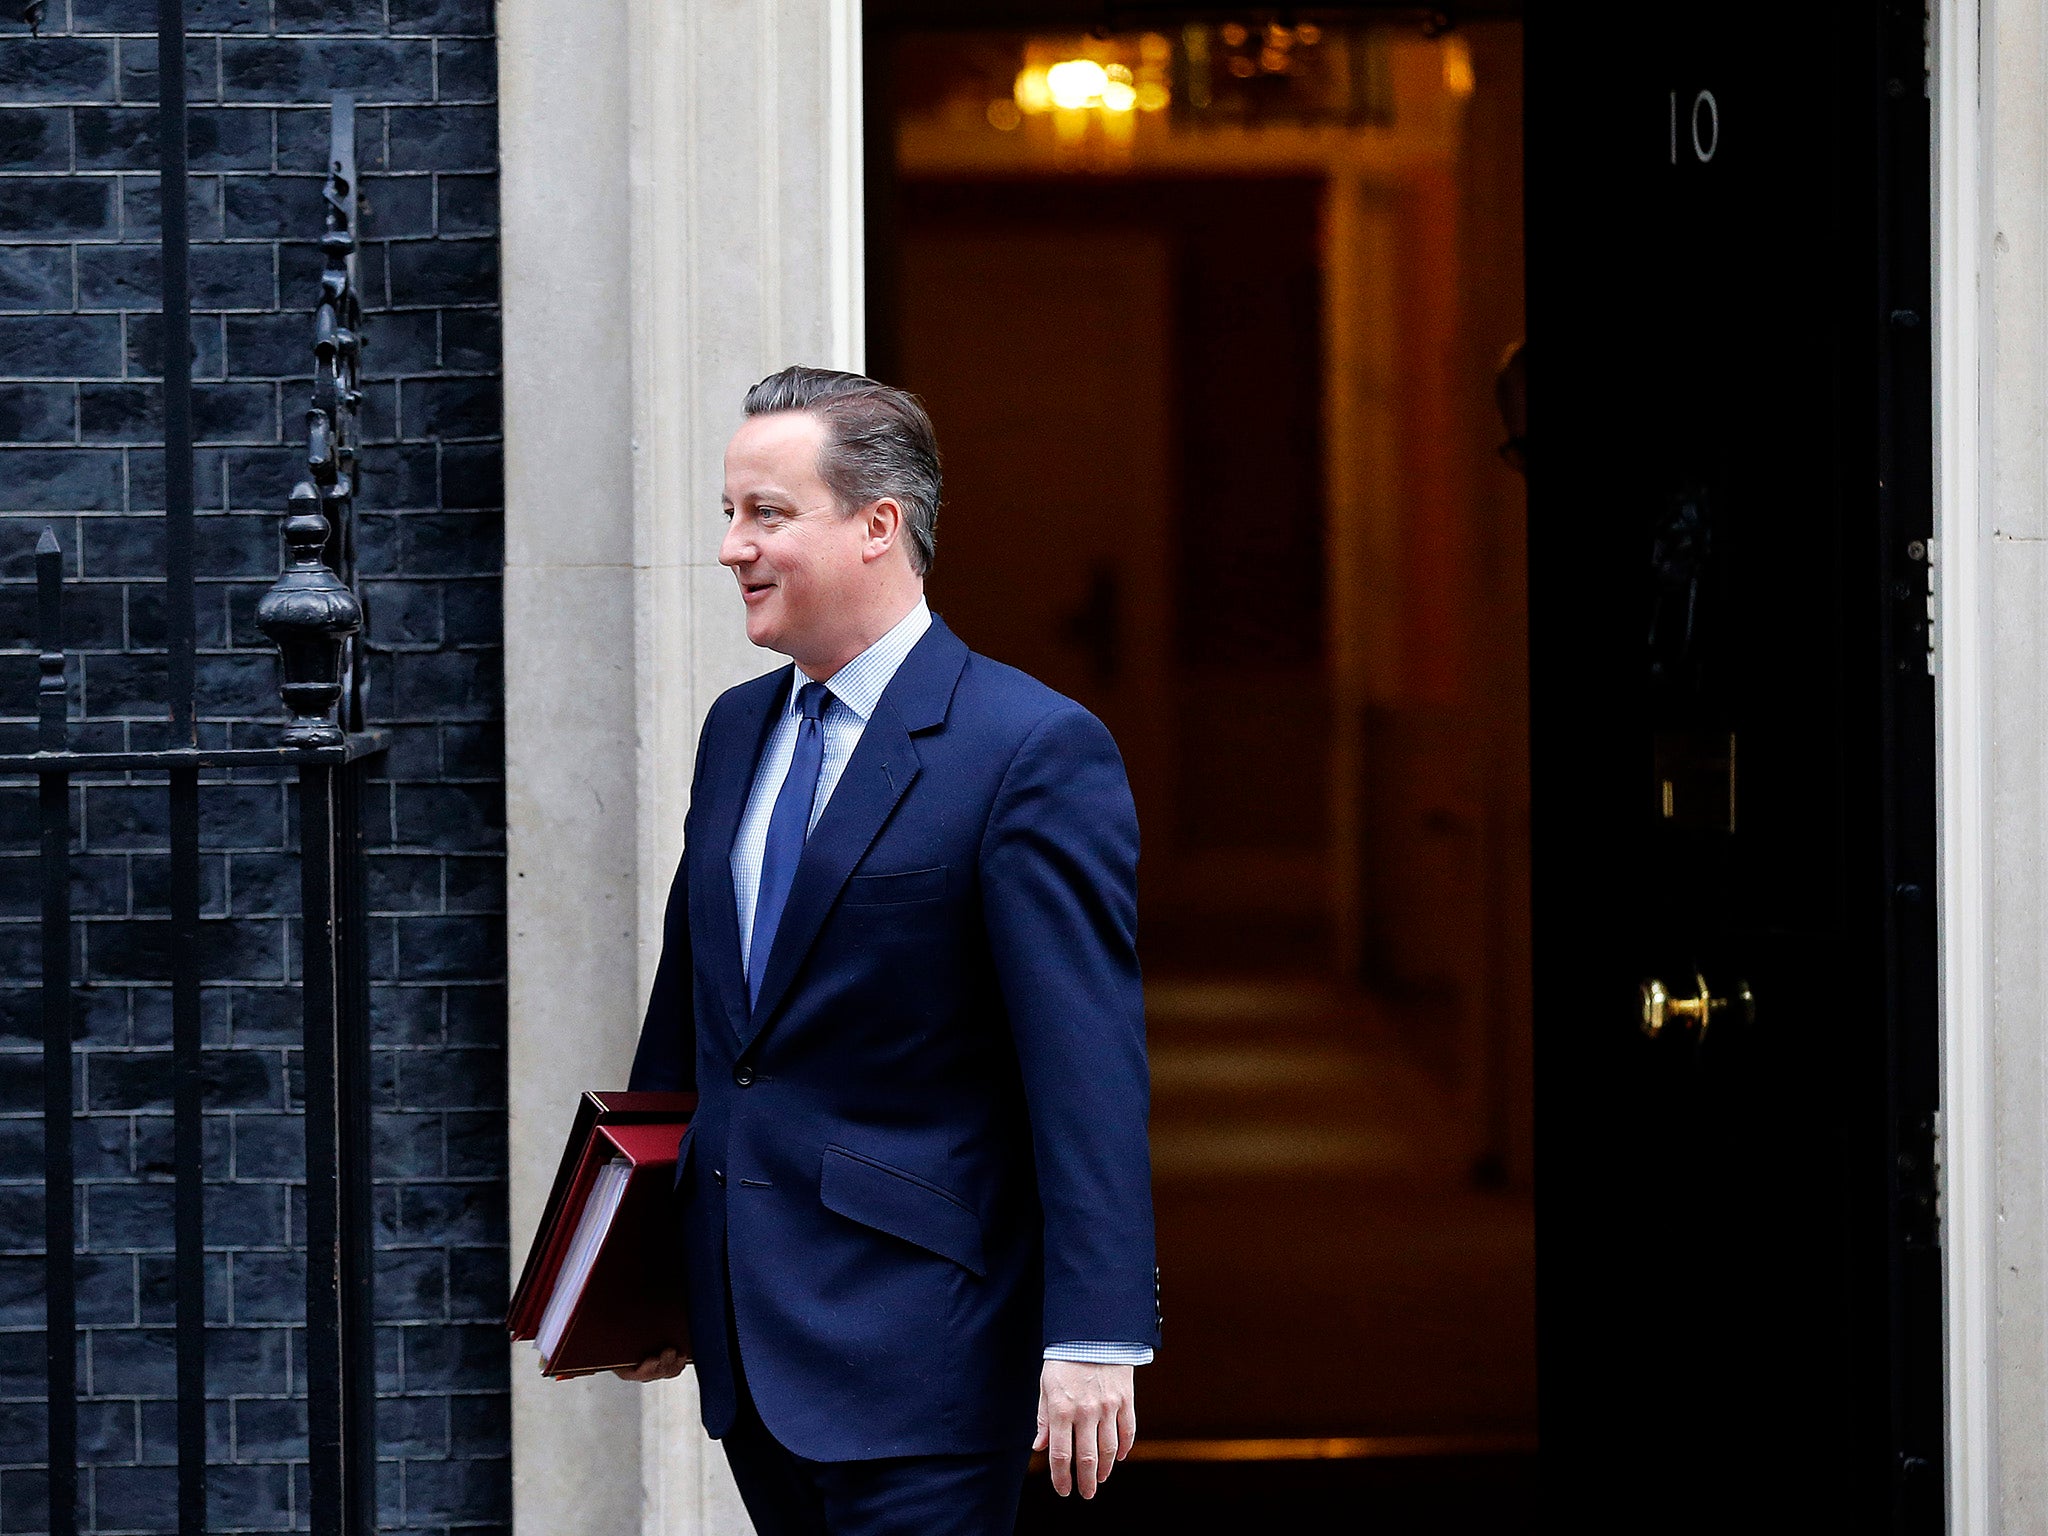 David Cameron leaves No 10 Downing Street to attend PMQs at the parliament in London